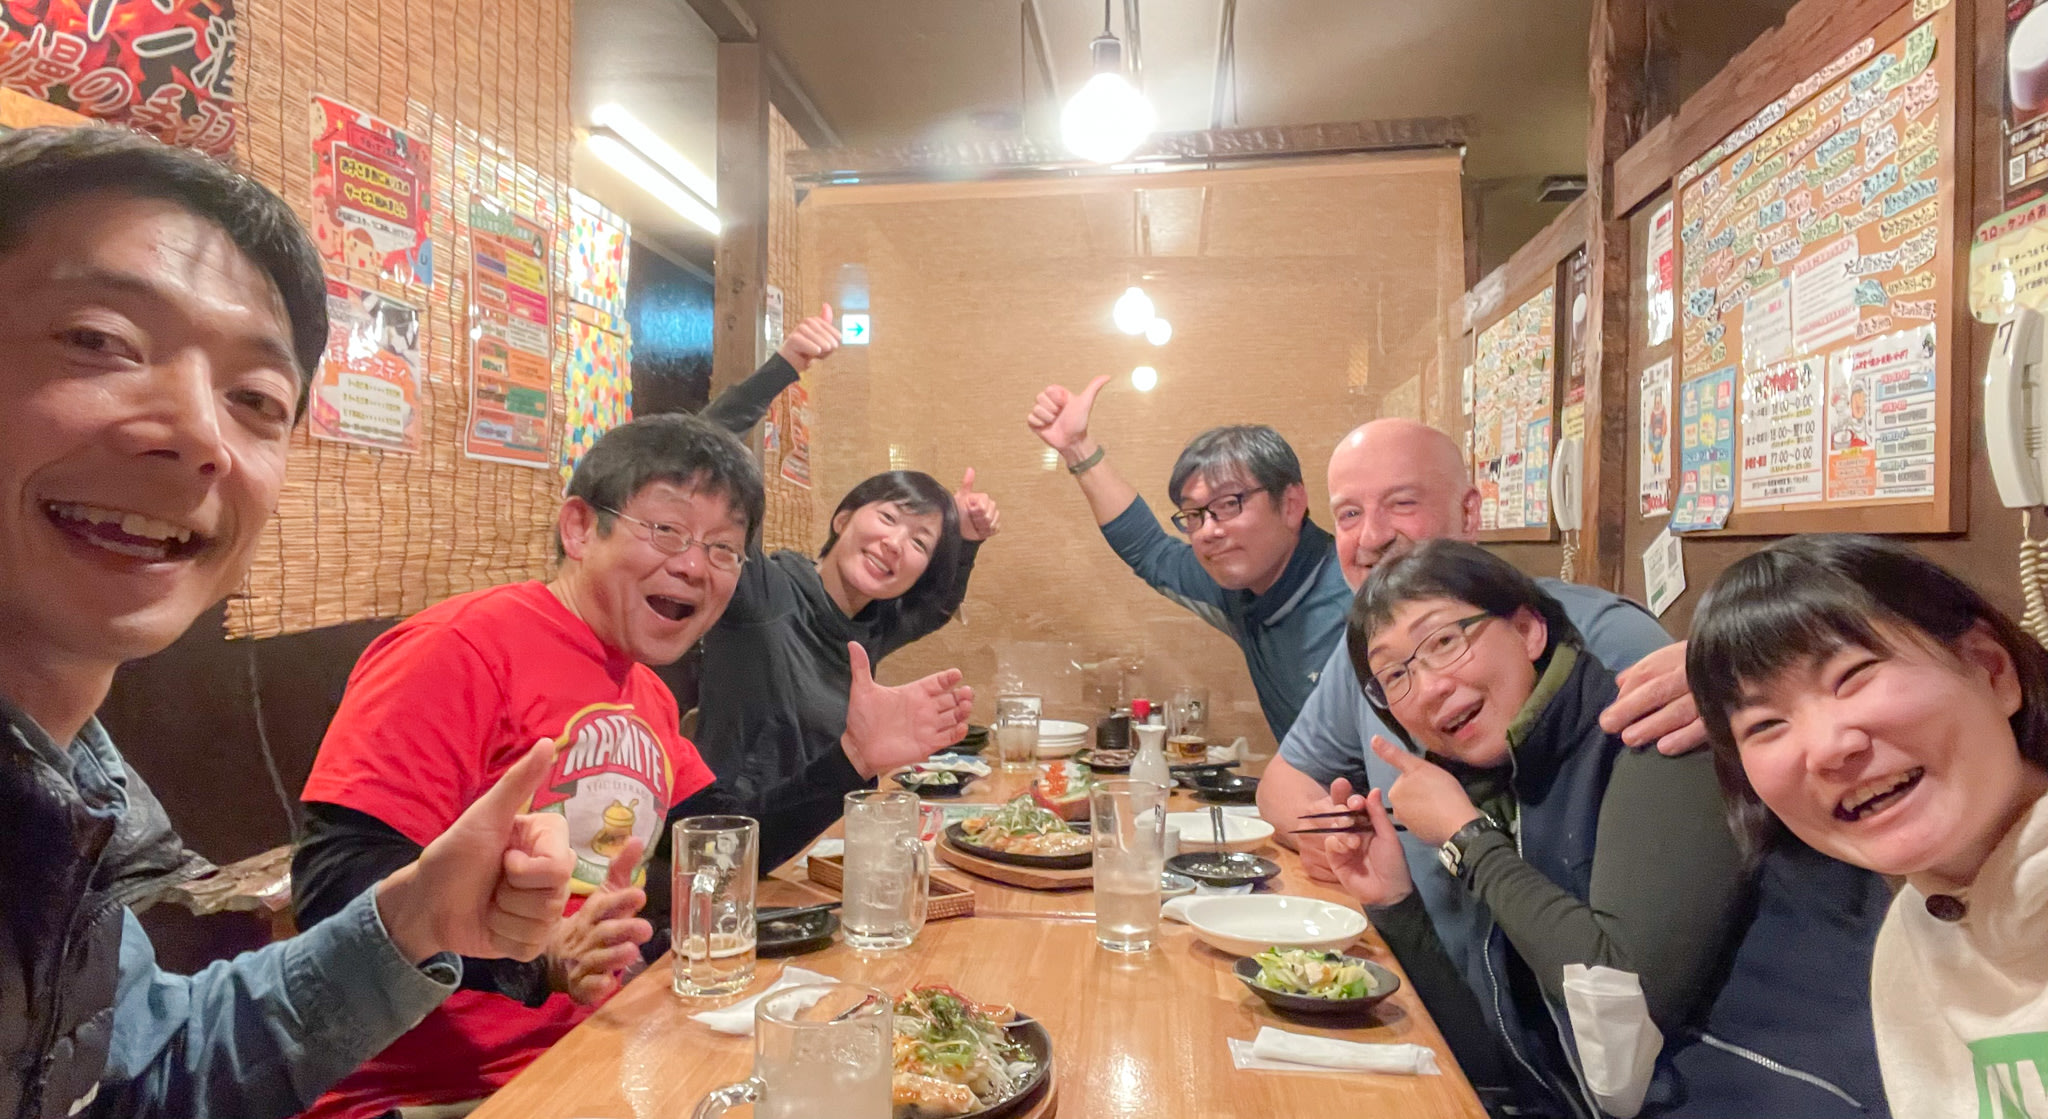 A group of people at a Japanese izakaya enjoying a meal and drinks together. A man at the front of the group is taking a selfie and other members of the group are giving thumbs-ups and waving.